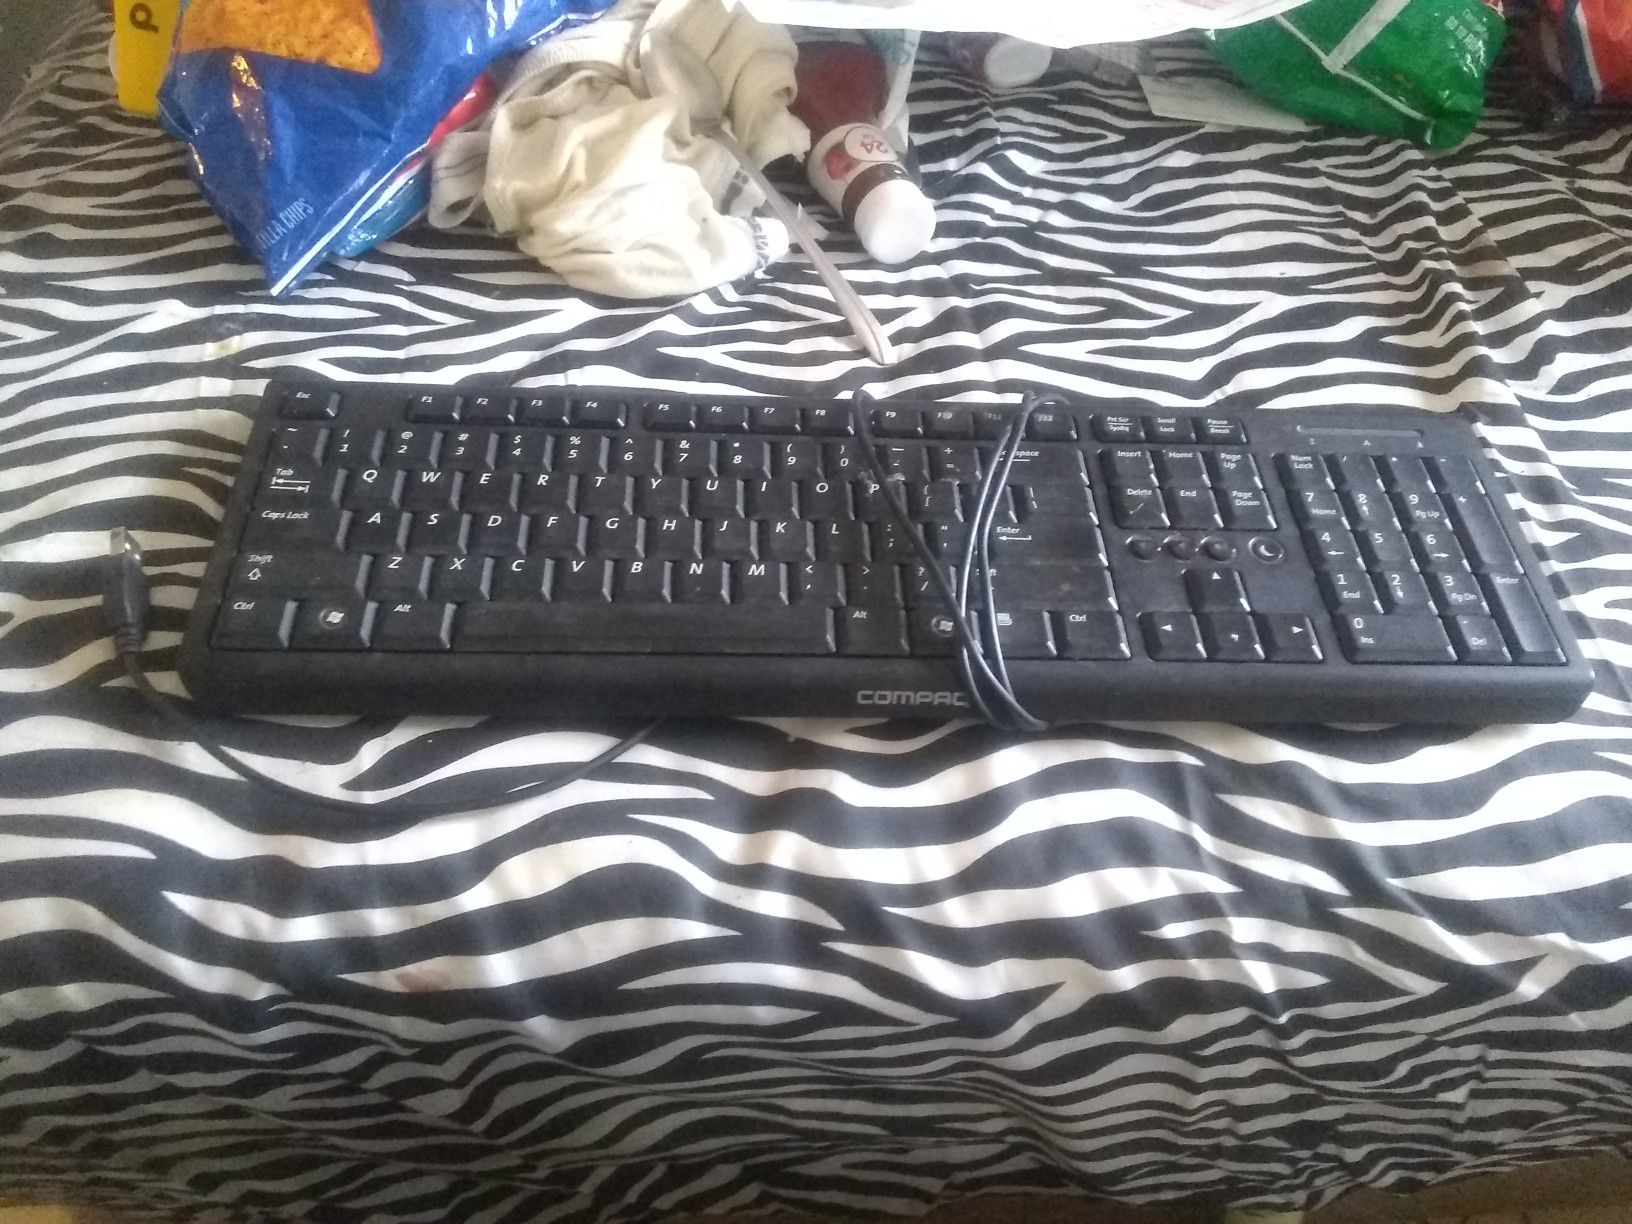 2 keyboards and 3 mice